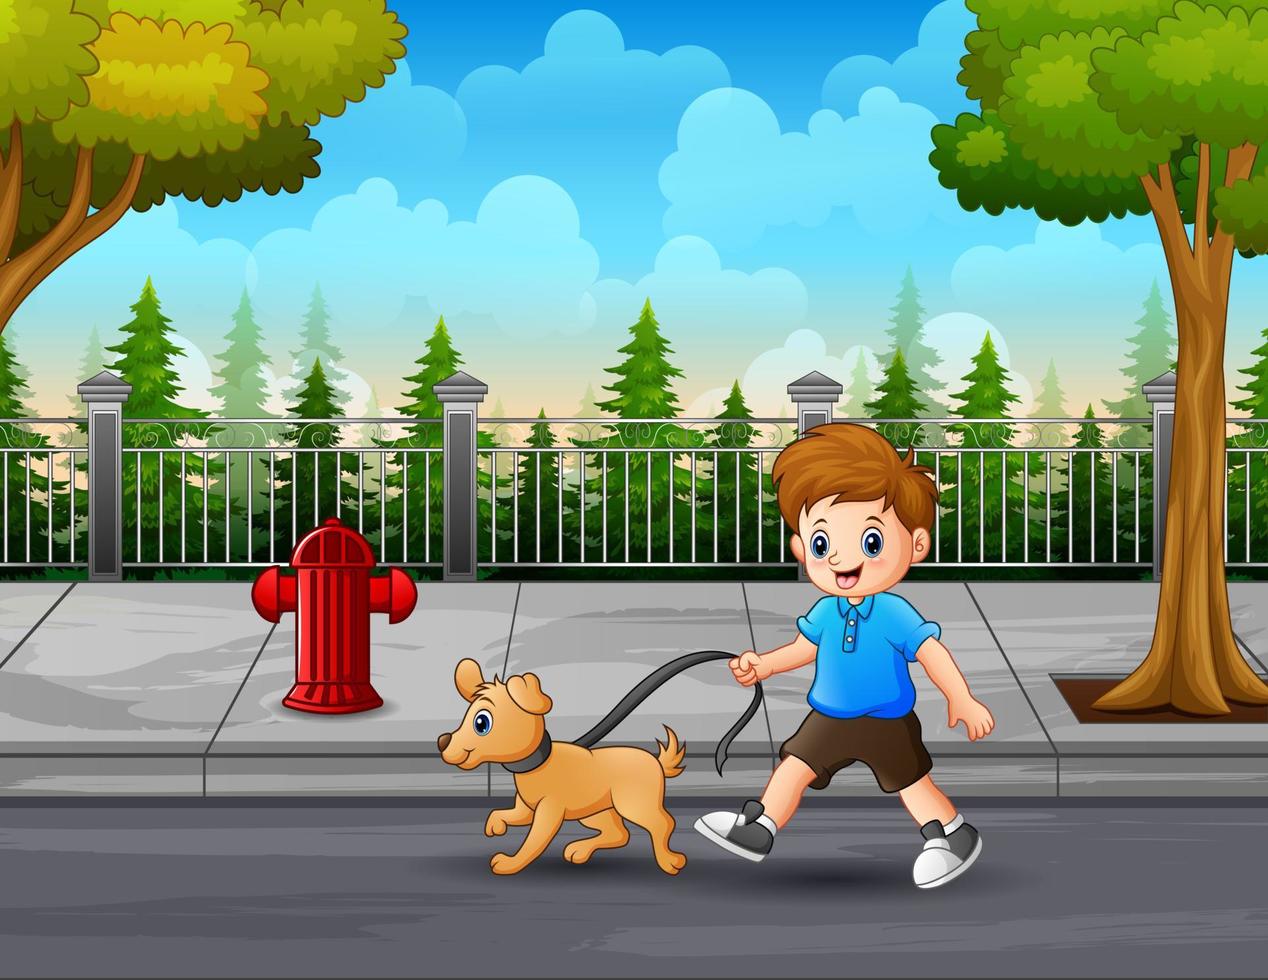 Illustration of a boy with a dog walking along the street vector